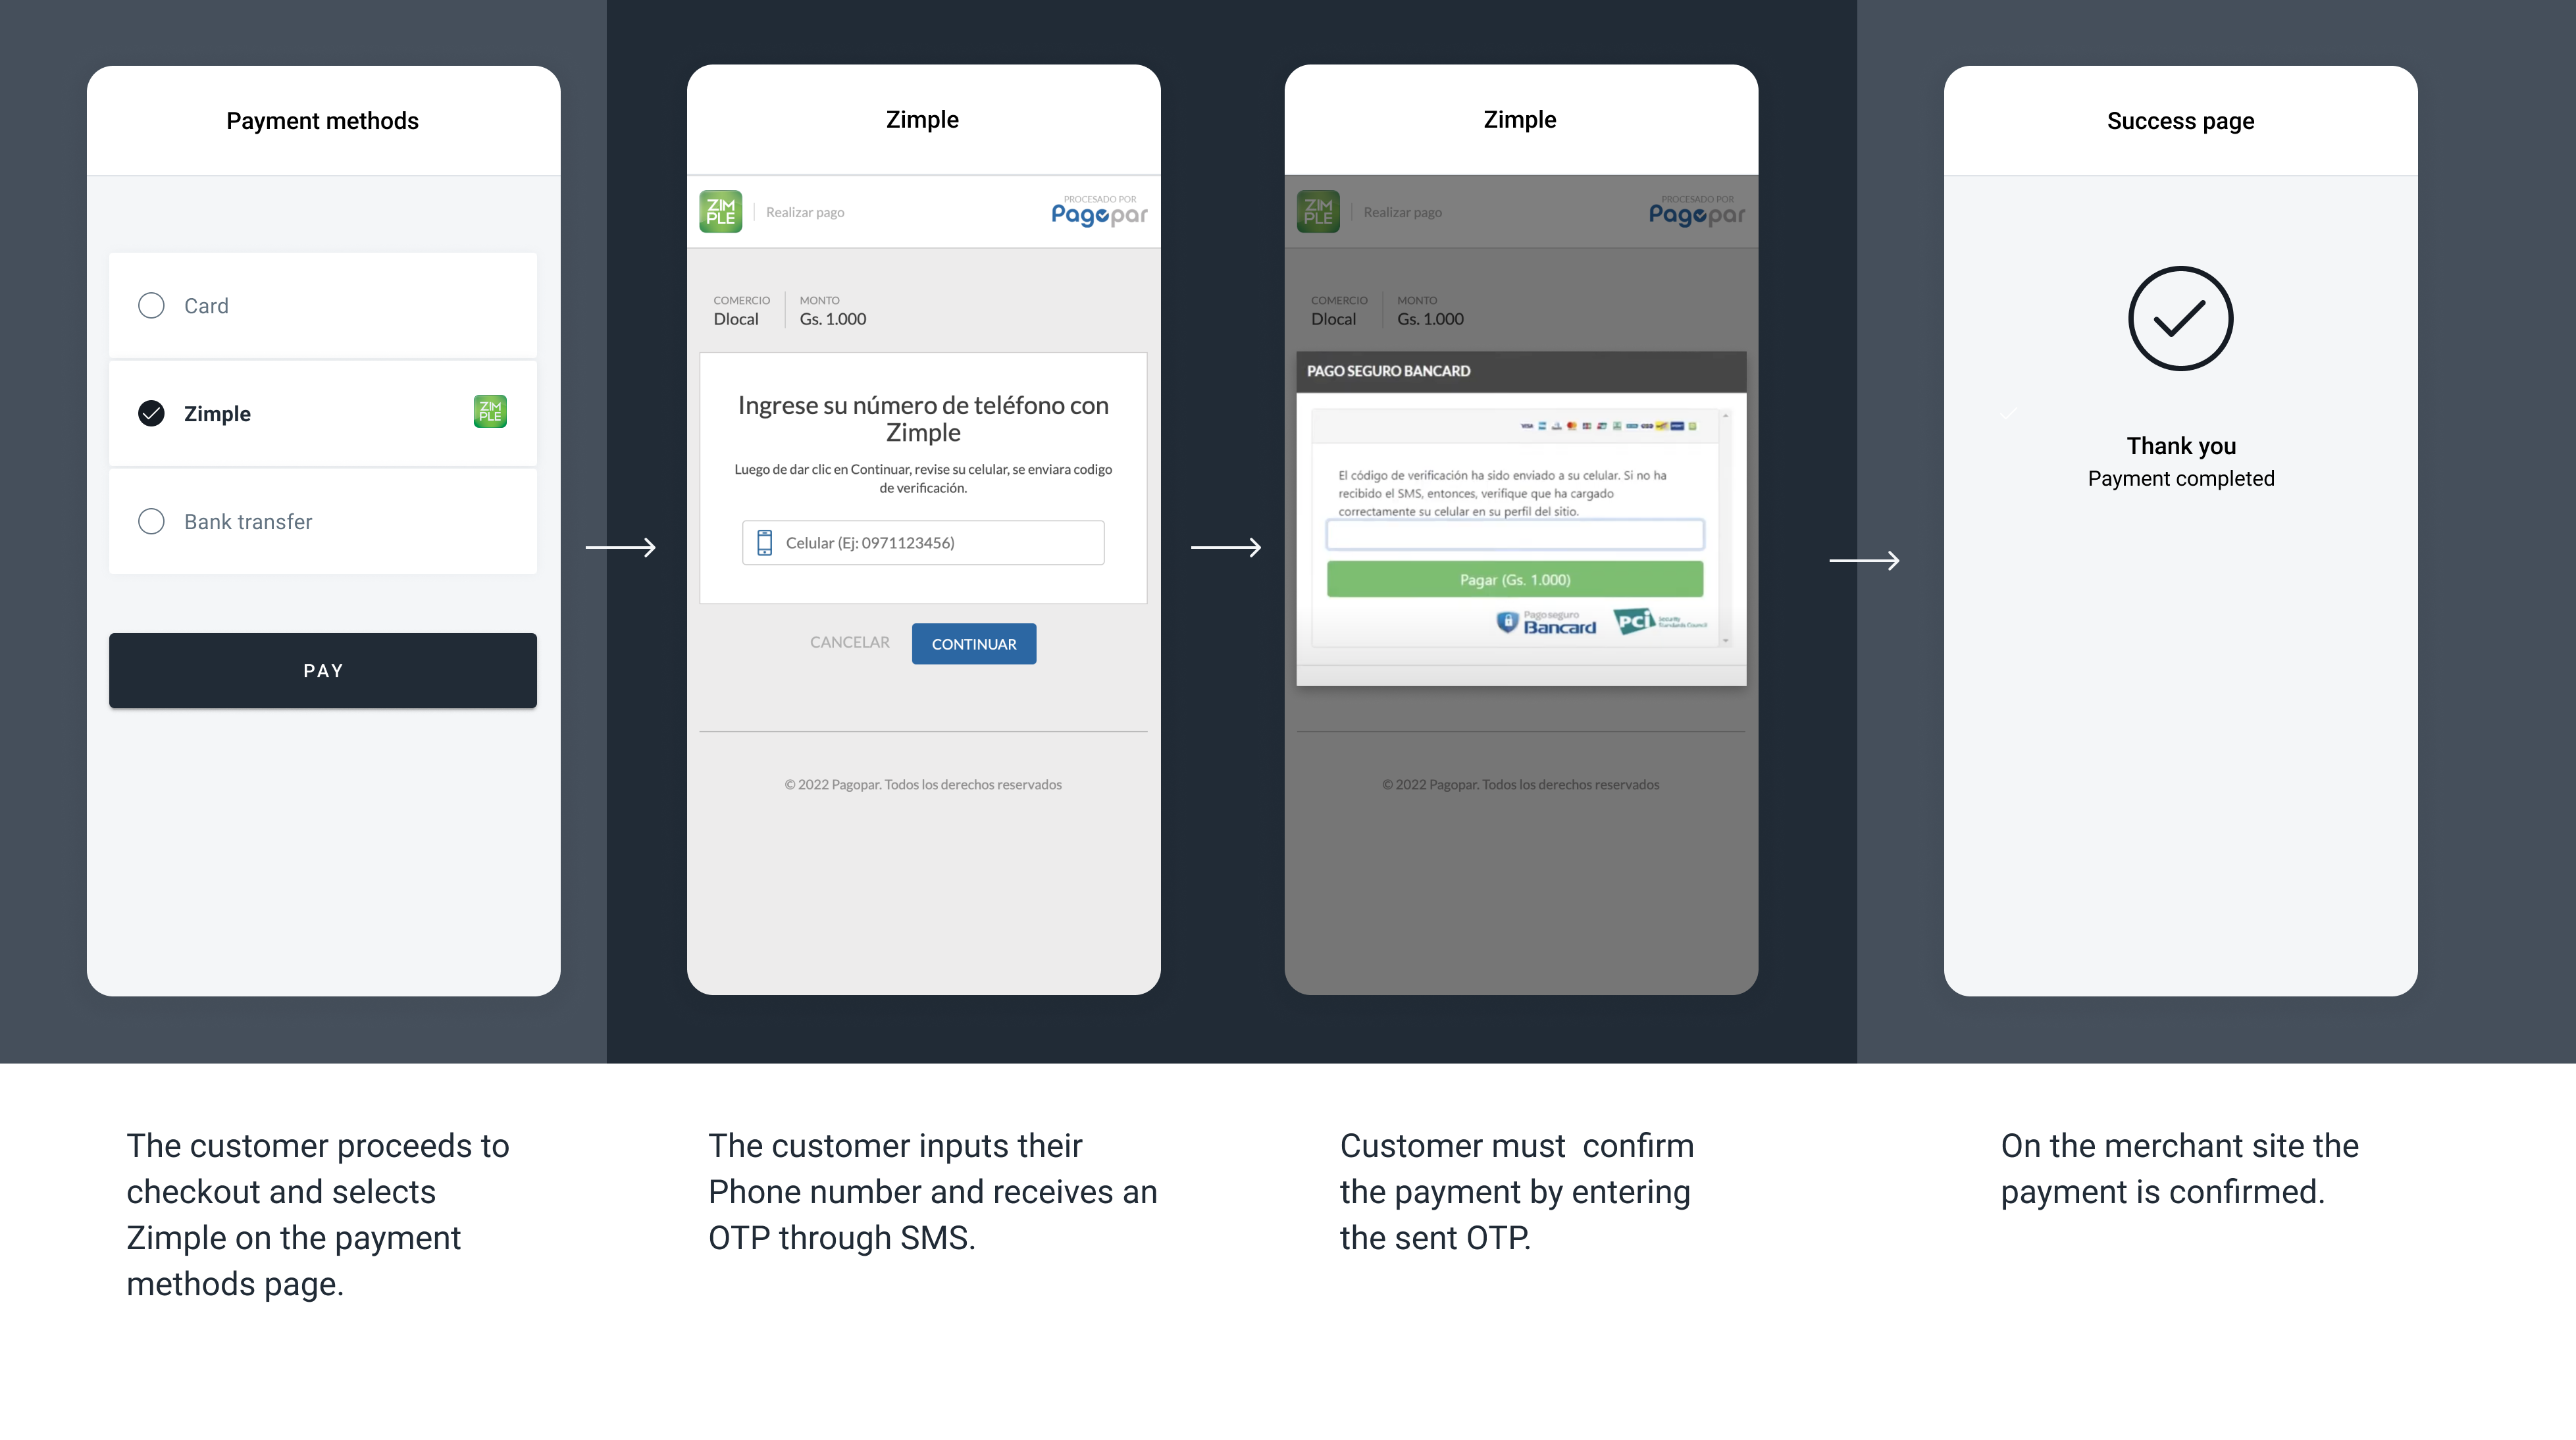 The screenshots illustrate a generic Zimple payment flow.